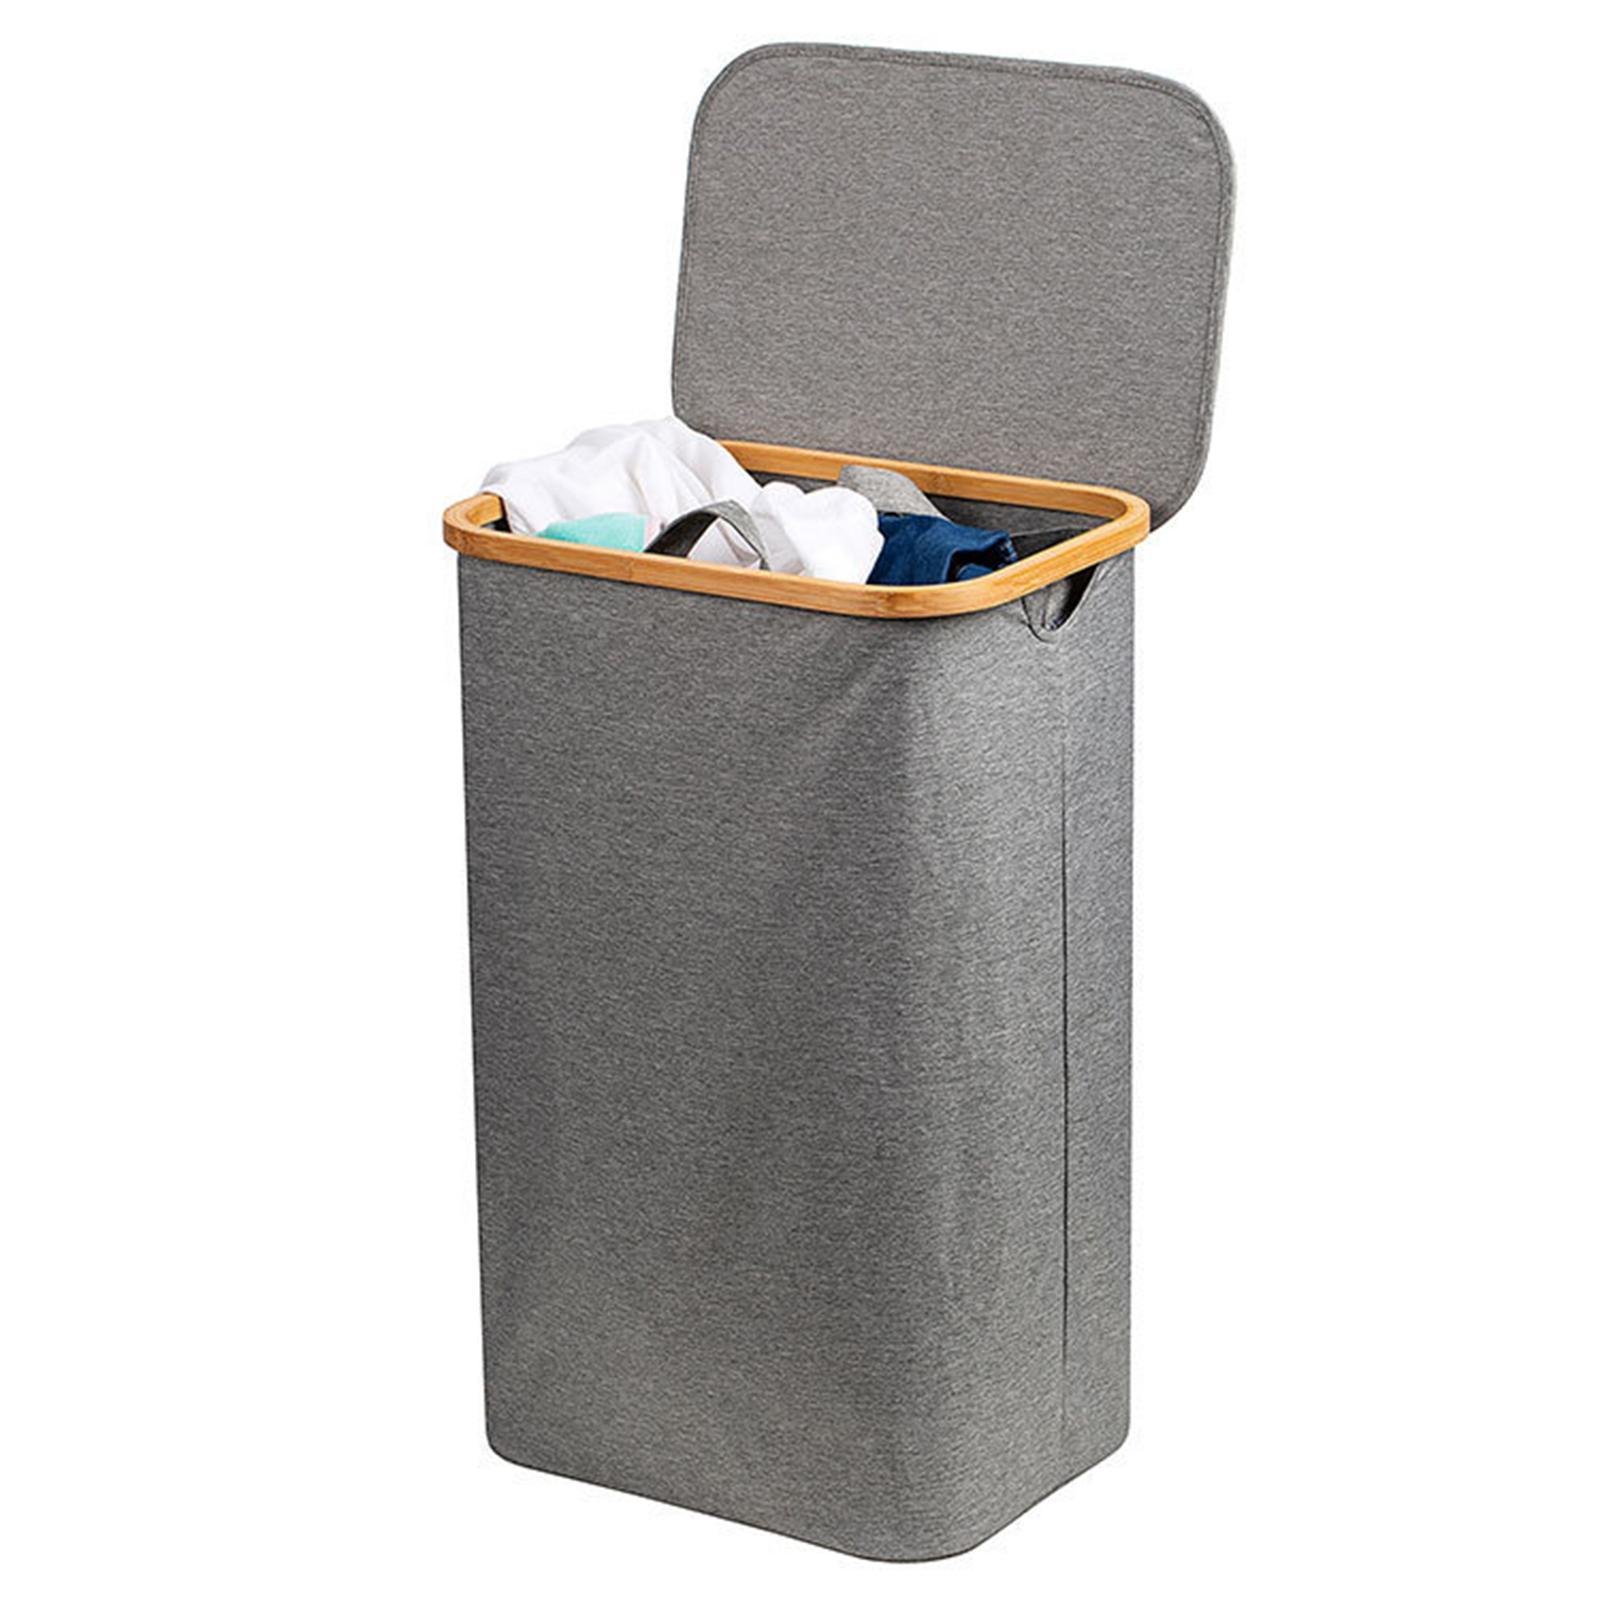 Grey Laundry Basket with Lid Organizer Clothing Clothes for Bedroom Bathroom